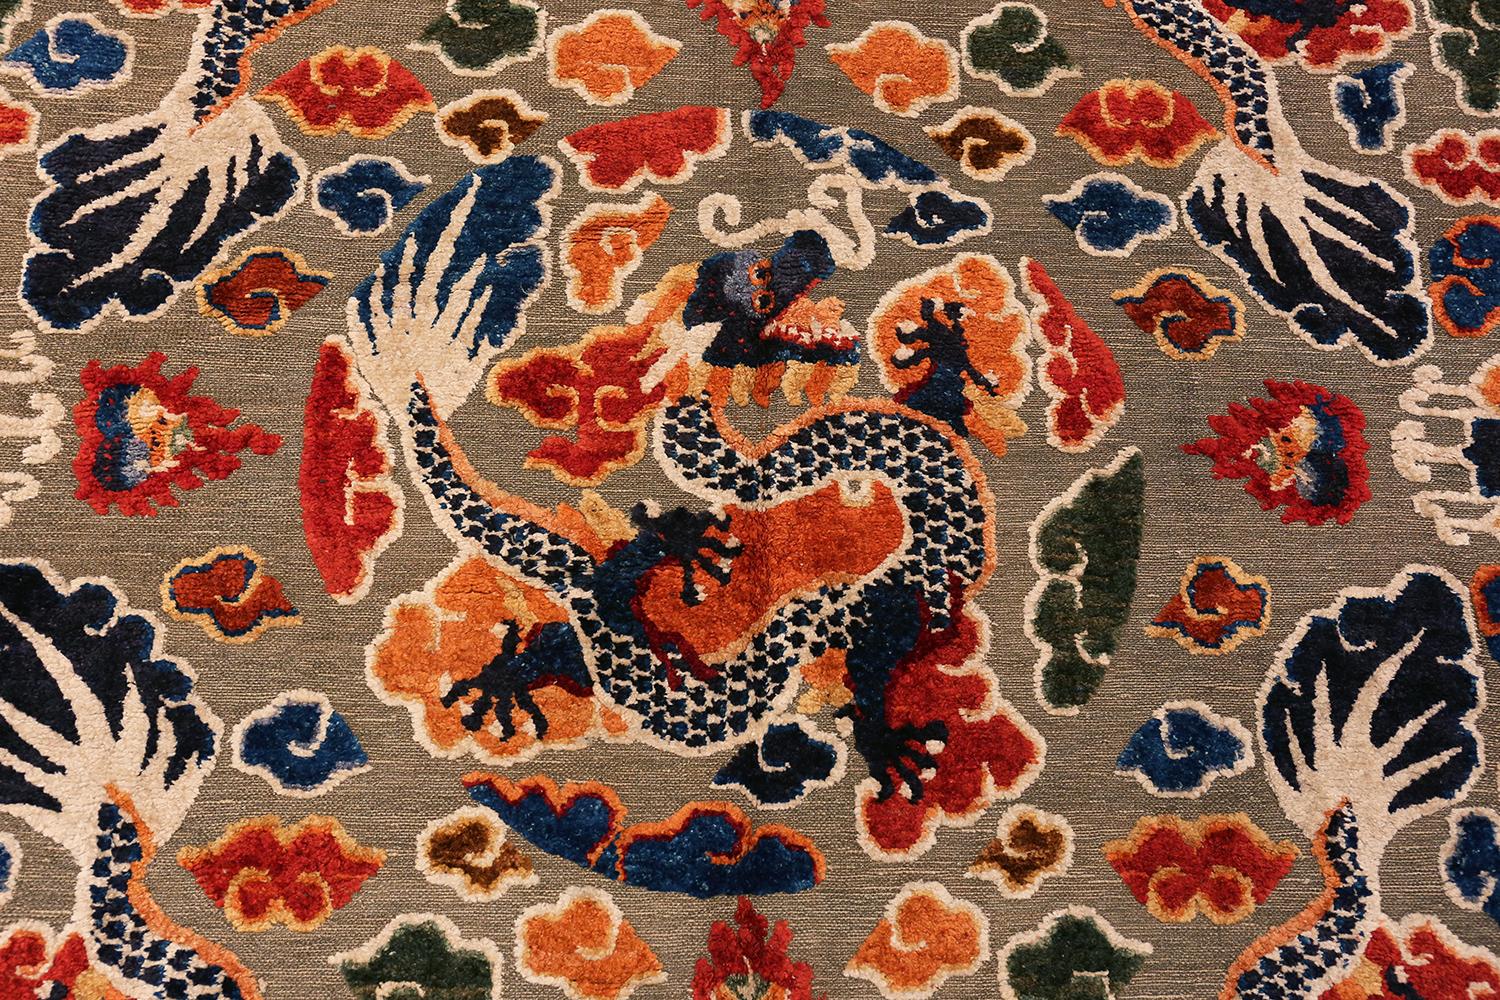 20th Century Collectible Antique Silk and Metallic Thread Chinese Dragon Rug. 6 ft x 9 ft 3in